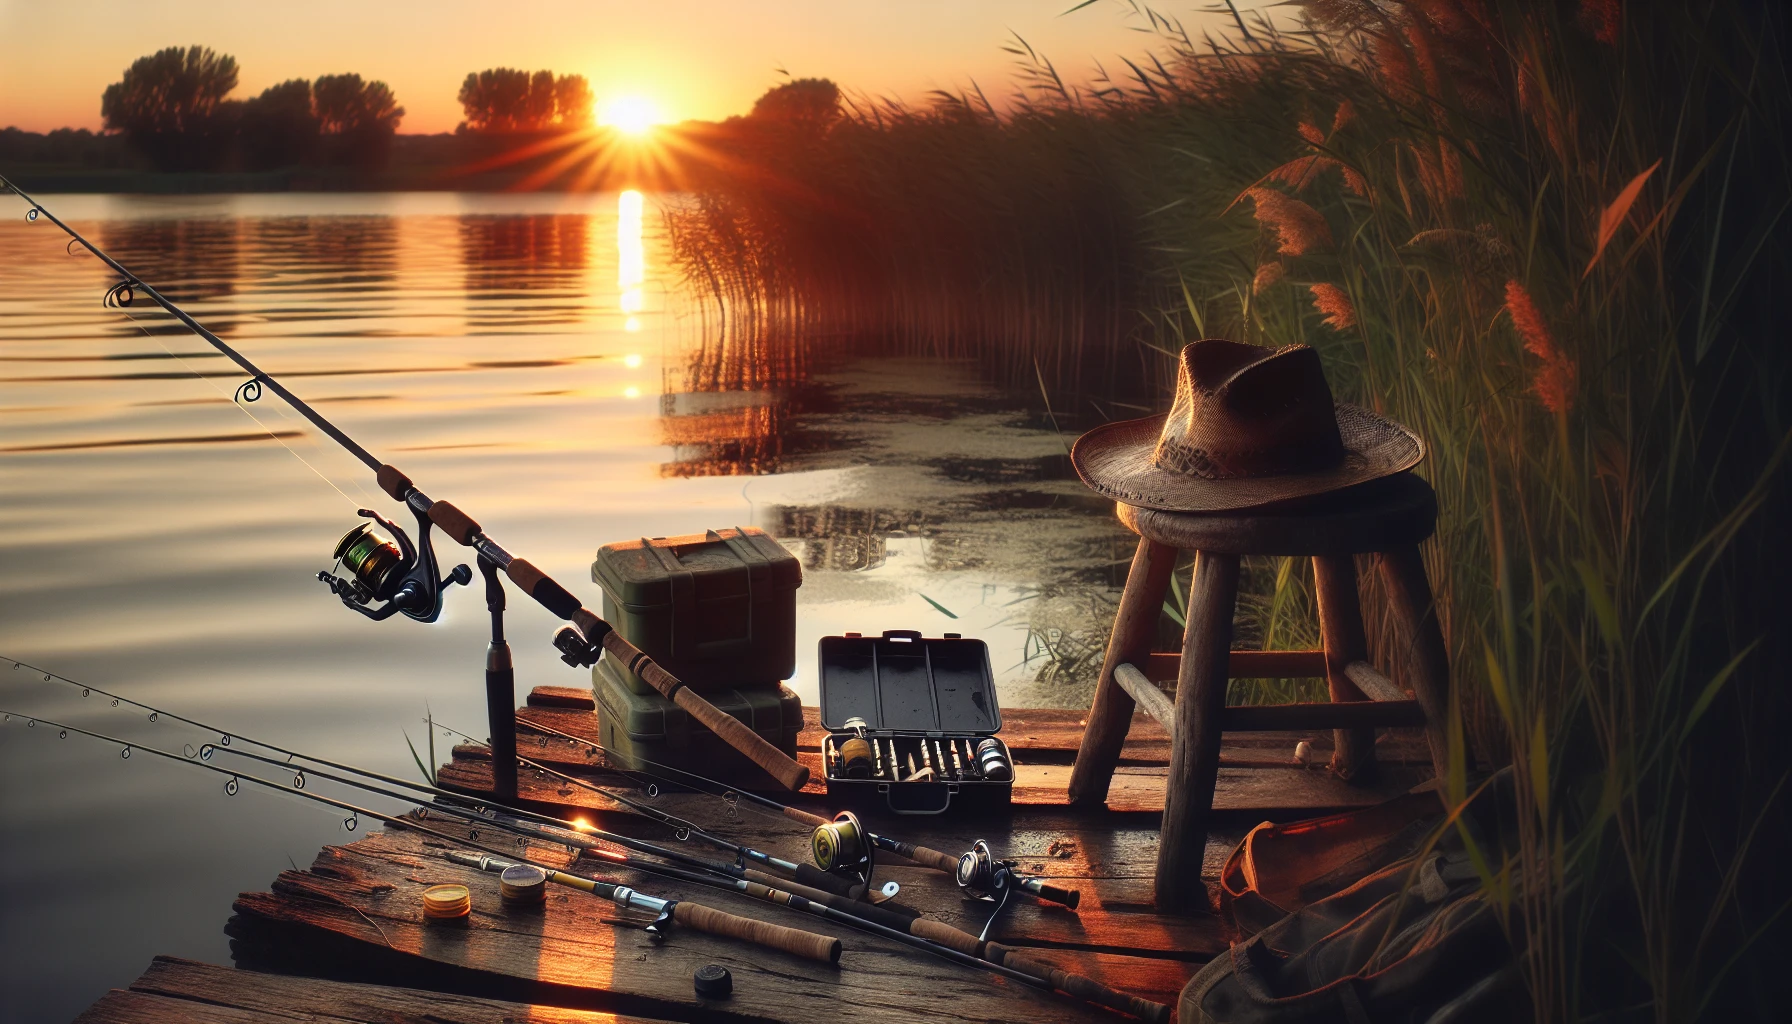 Fishing gear on a wooden dockby the shoreline, surrounded by vegetation and sunset.